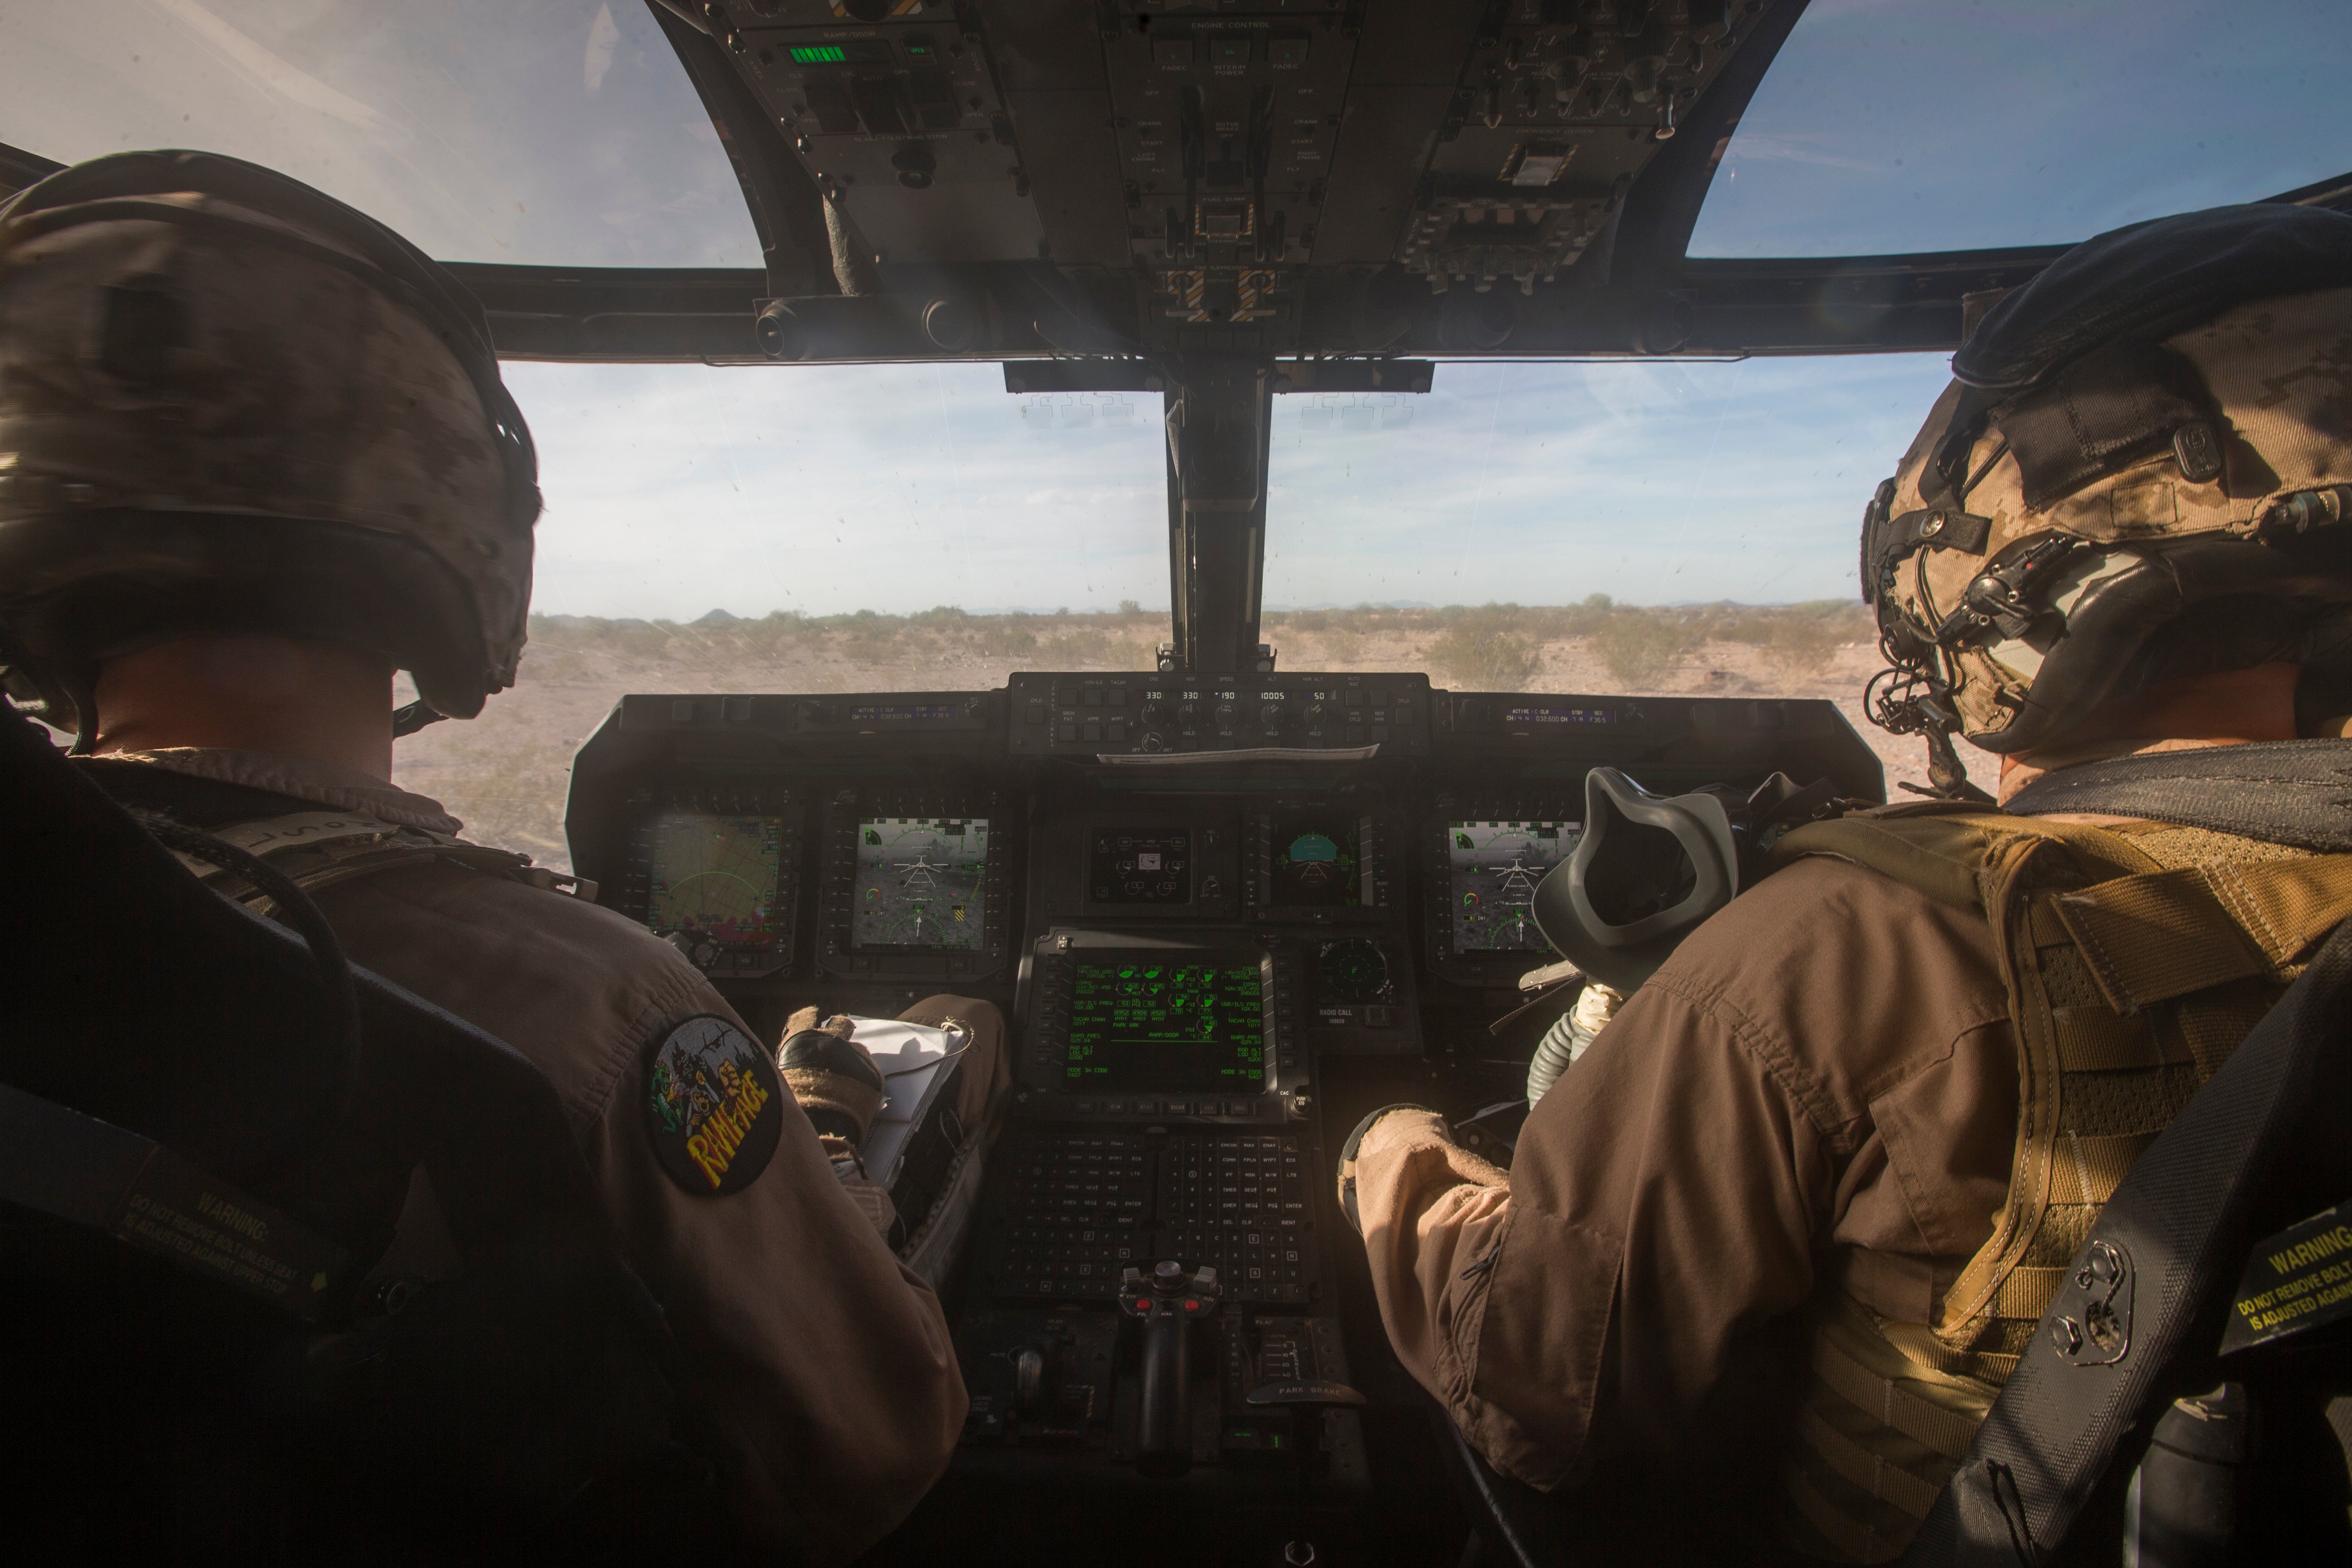 U.S. Marine Corps Maj. Eric Duchene, MV-22 instructor pilot, left, with Marine Aviation Weapons and Tactic Squadron One (MAWTS-1) and Capt. Austin Stobaugh MV-22 pilot with Marine Medium Tiltrotor Squadron (VMM) 262, 1st Marine Aircraft Wing (MAW) lift off in an MV-22B Osprey during a marine expeditionary unit exercise (MEUEX) at Yuma, Ariz., Oct. 7, 2016. MEUEX was part of Weapons and Tactics Instructors course (WTI) 1-17, a seven week training event hosted by MAWTS-1 cadre. MAWTS-1 provides standardized tactical training and certification of unit instructor qualifications to support Marine Aviation Training and Readiness and assists in developing and employing aviation weapons and tactics. (U.S. Marine Corps photo by Cpl. AaronJames Vinculado, MAWTS-1)